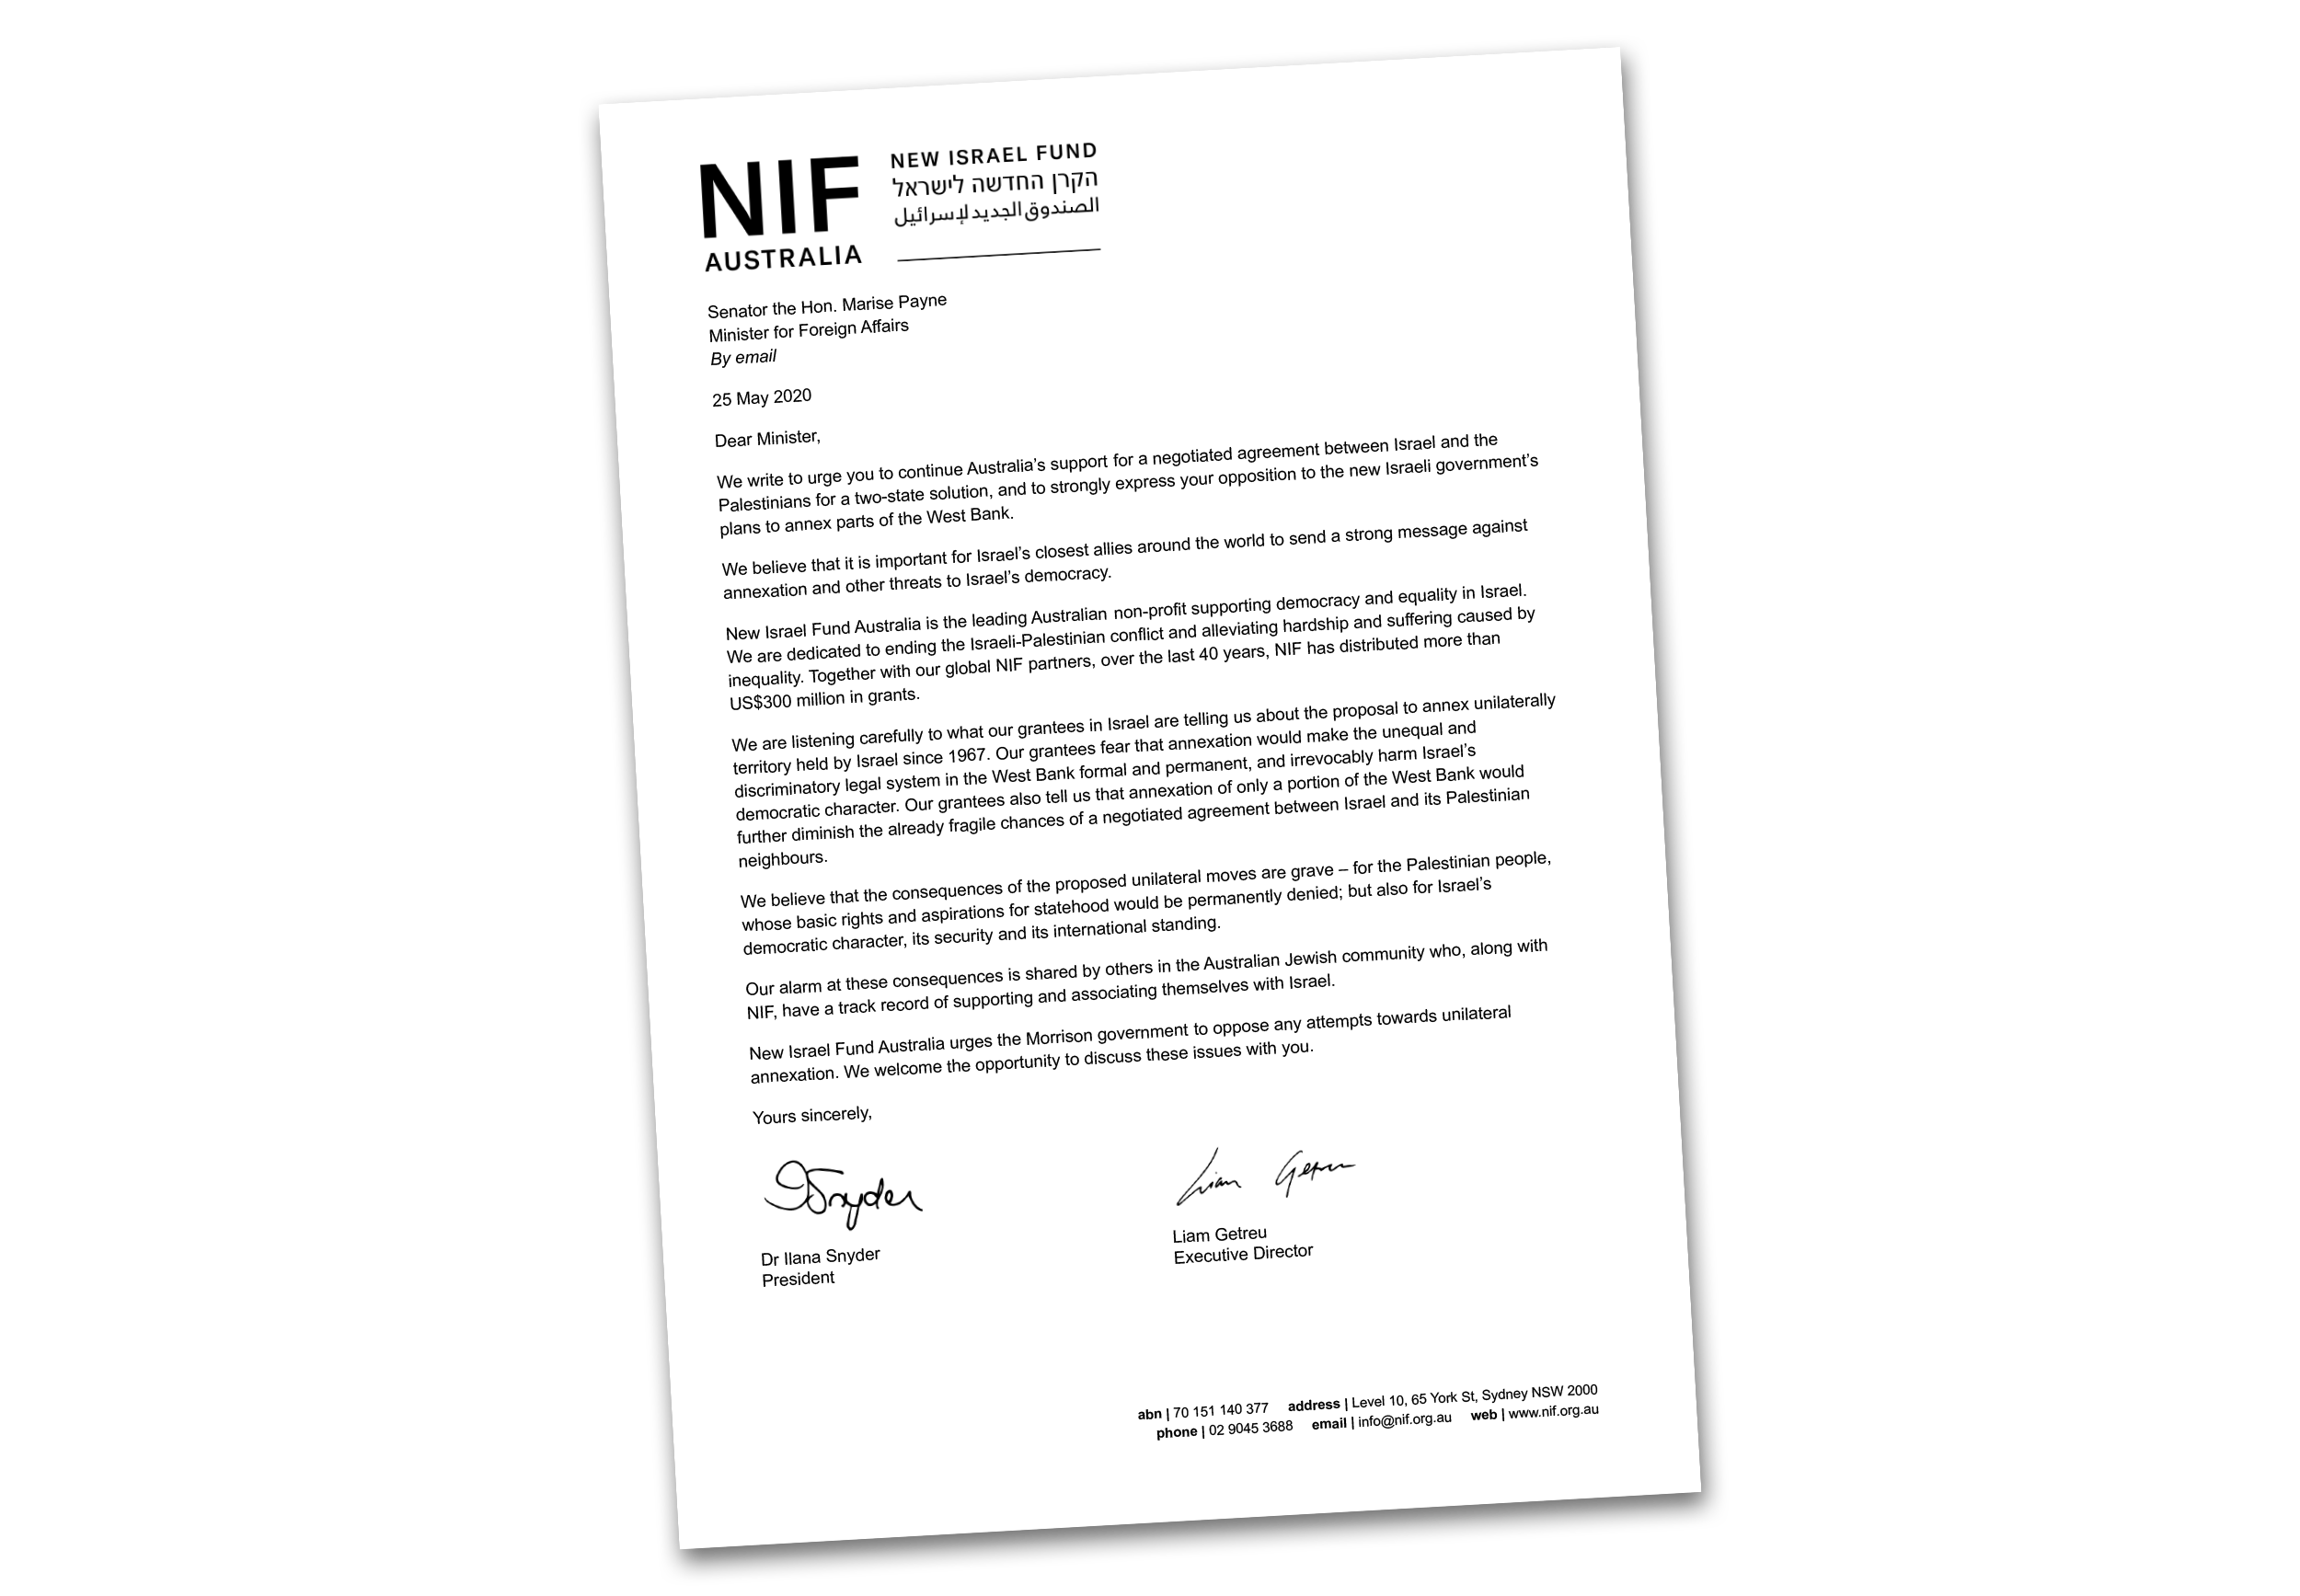 NIF's letter to Foreign Minister Marise Payne